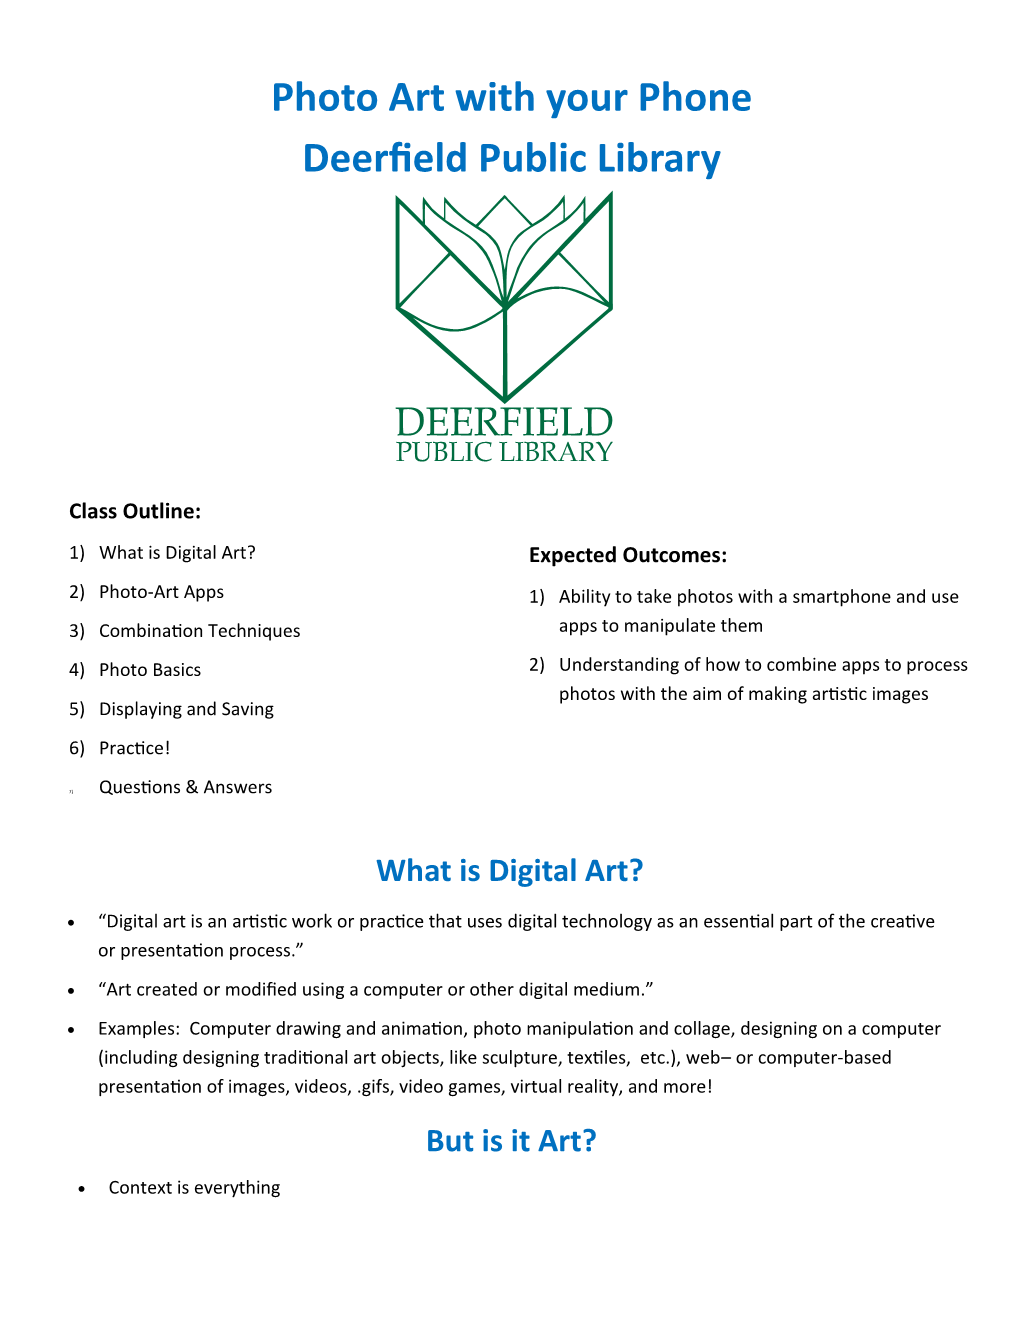 Photo Art with Your Phone Deerfield Public Library